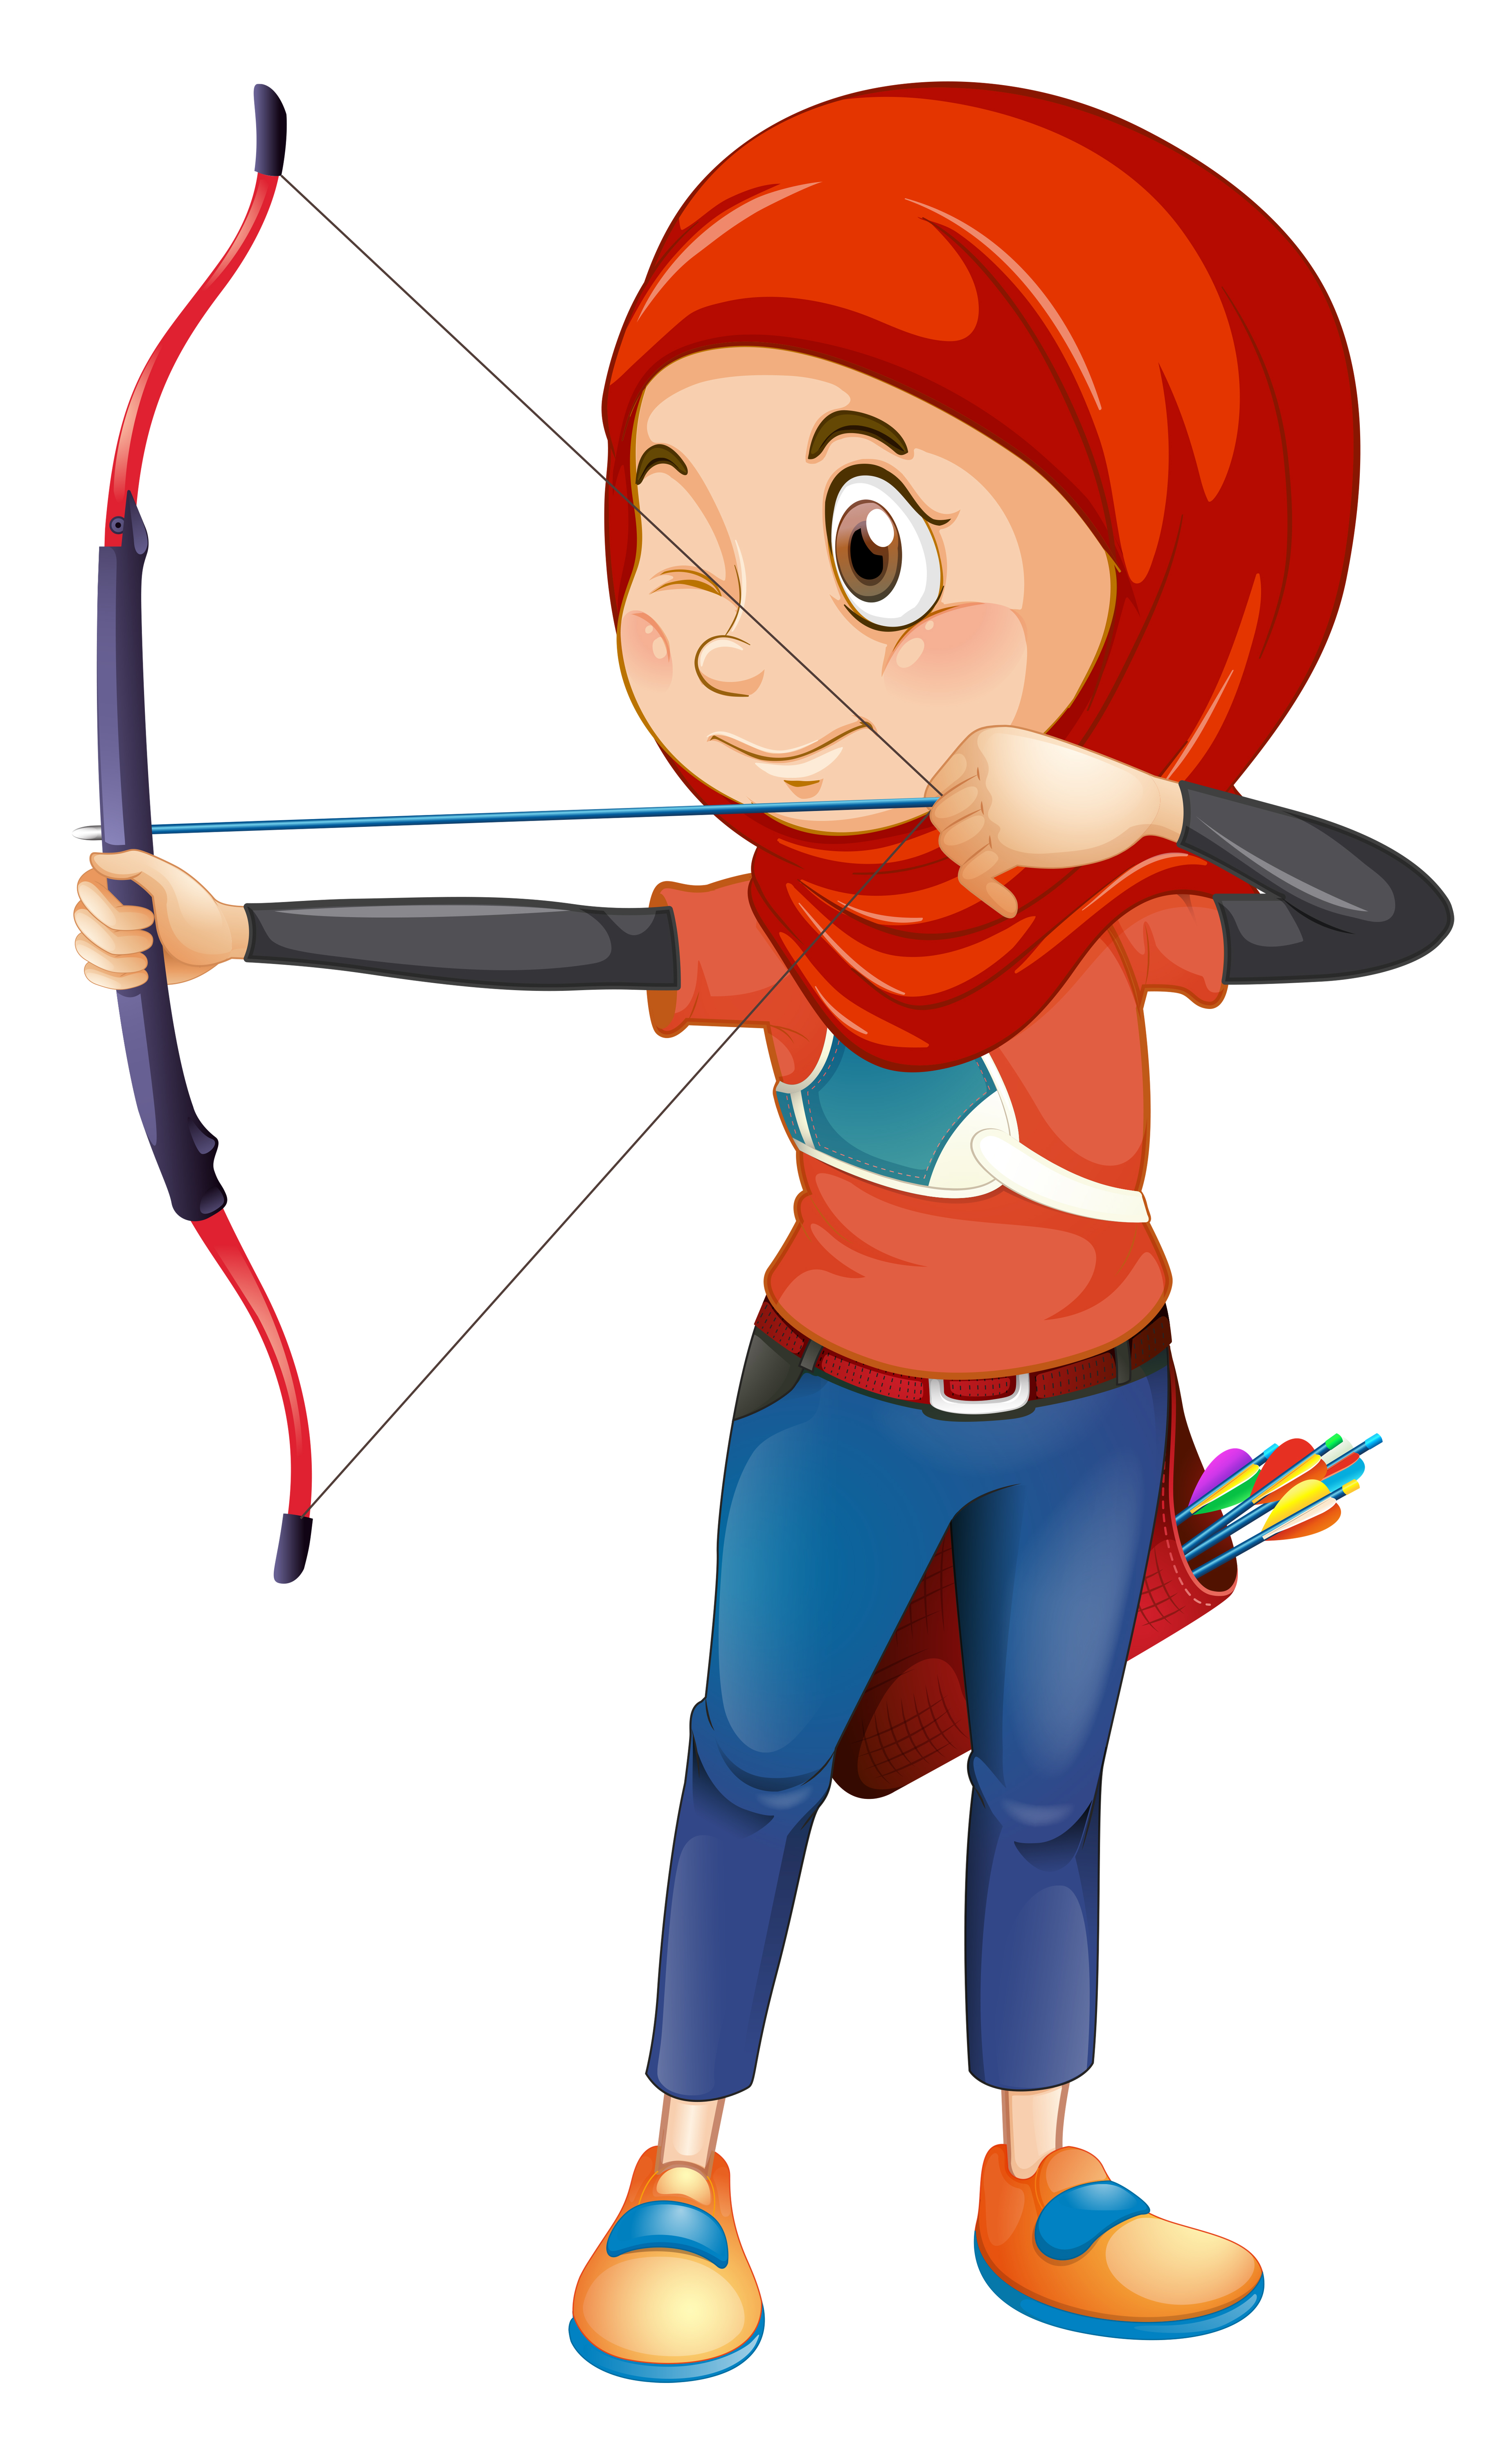 A muslim archery  on whiye background Download Free 